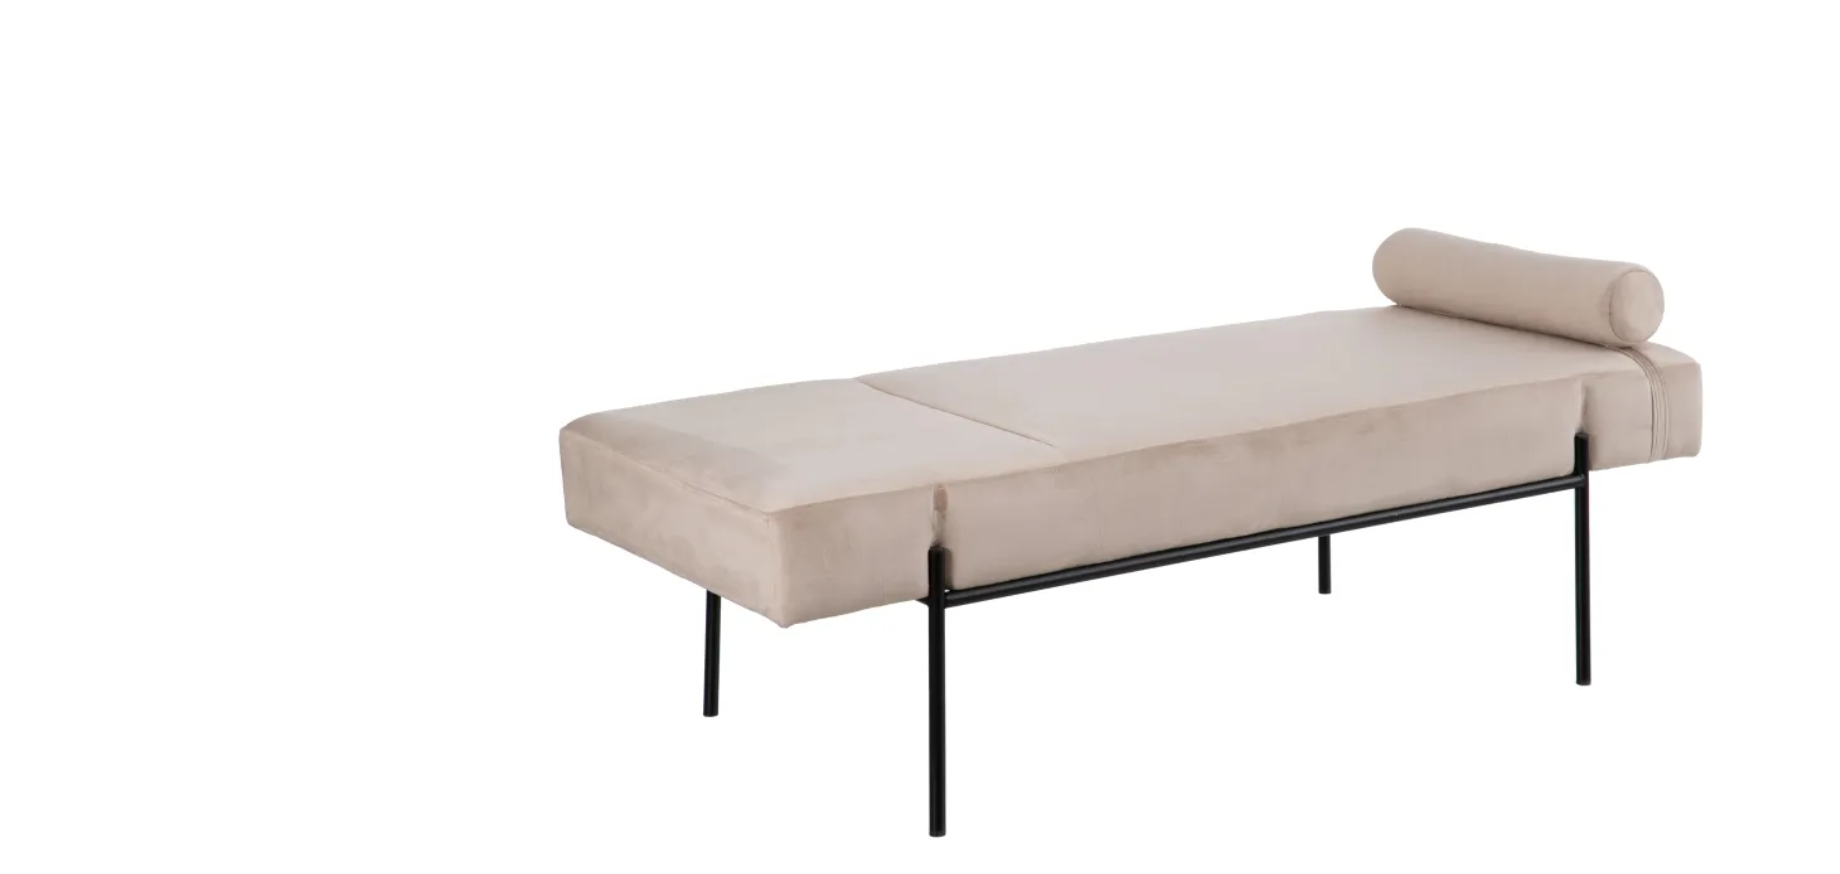 Chaise-long 140*59*42 veludo beige/metal